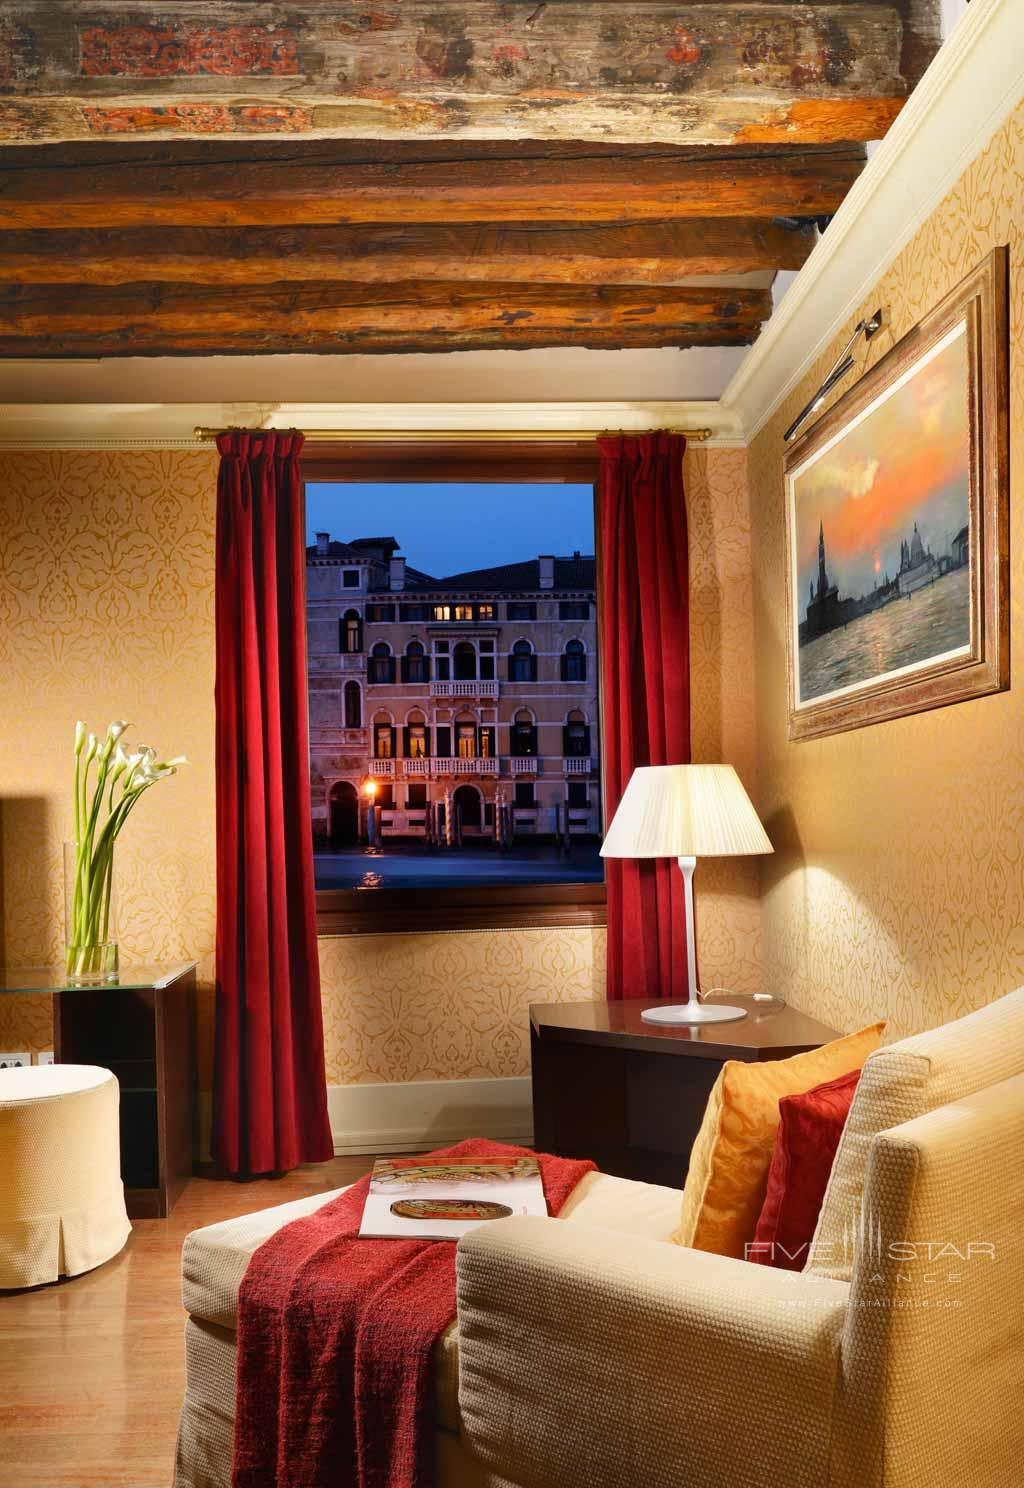 Junior Suite with Grand Canal Views at Hotel Palazzo Giovanelli and Gran Canal, Venice, Italy